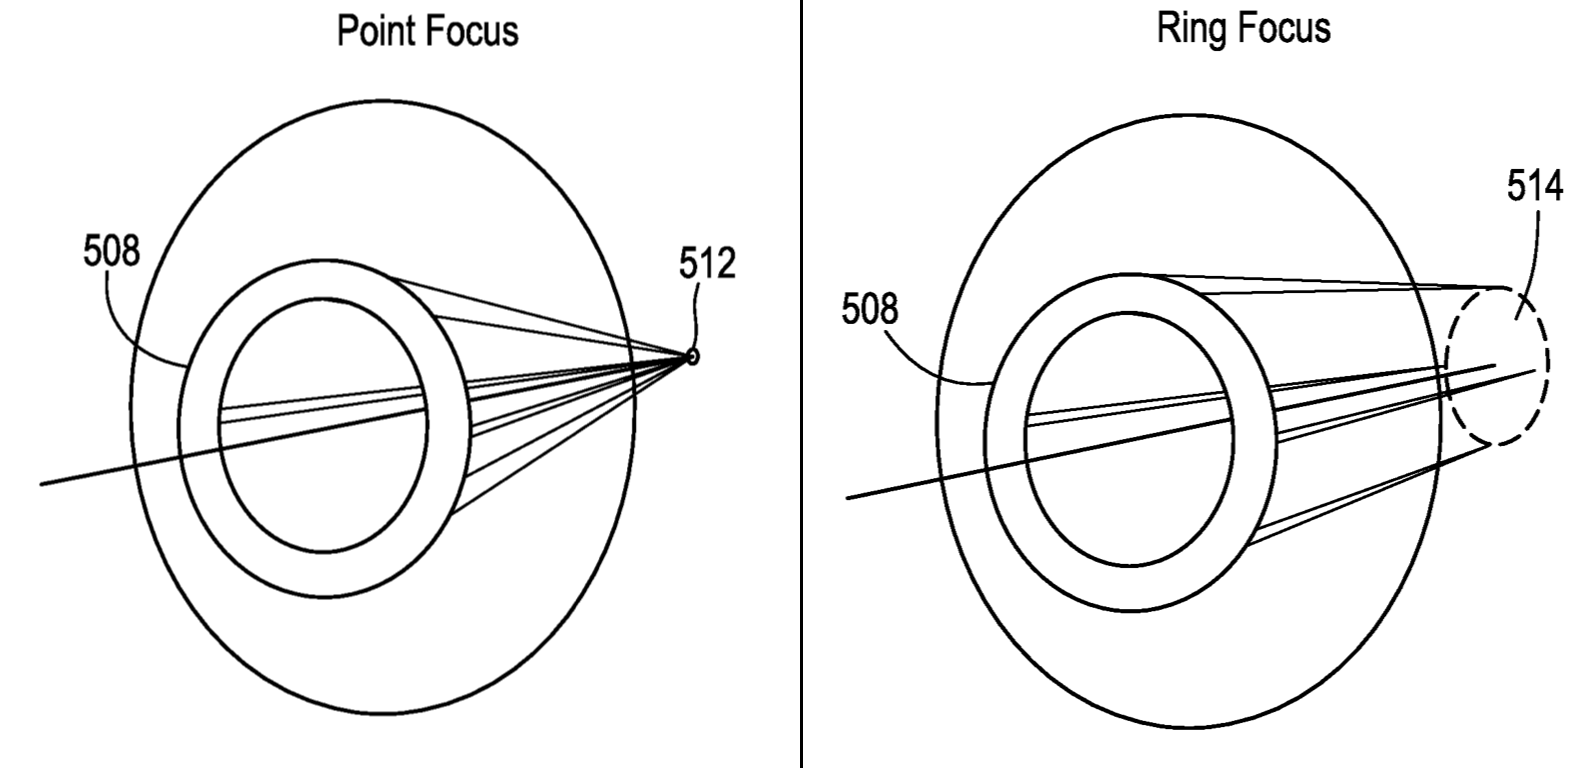 This study, funded by J&J, touts the advantage of optics that create a ring focus (right) rather than the point focus (left) of existing lenses. The company’s prototype soft contact lens for myopia has a more significant effect on slowing disease progression than single-vision or dual-focus lenses, according to the study.